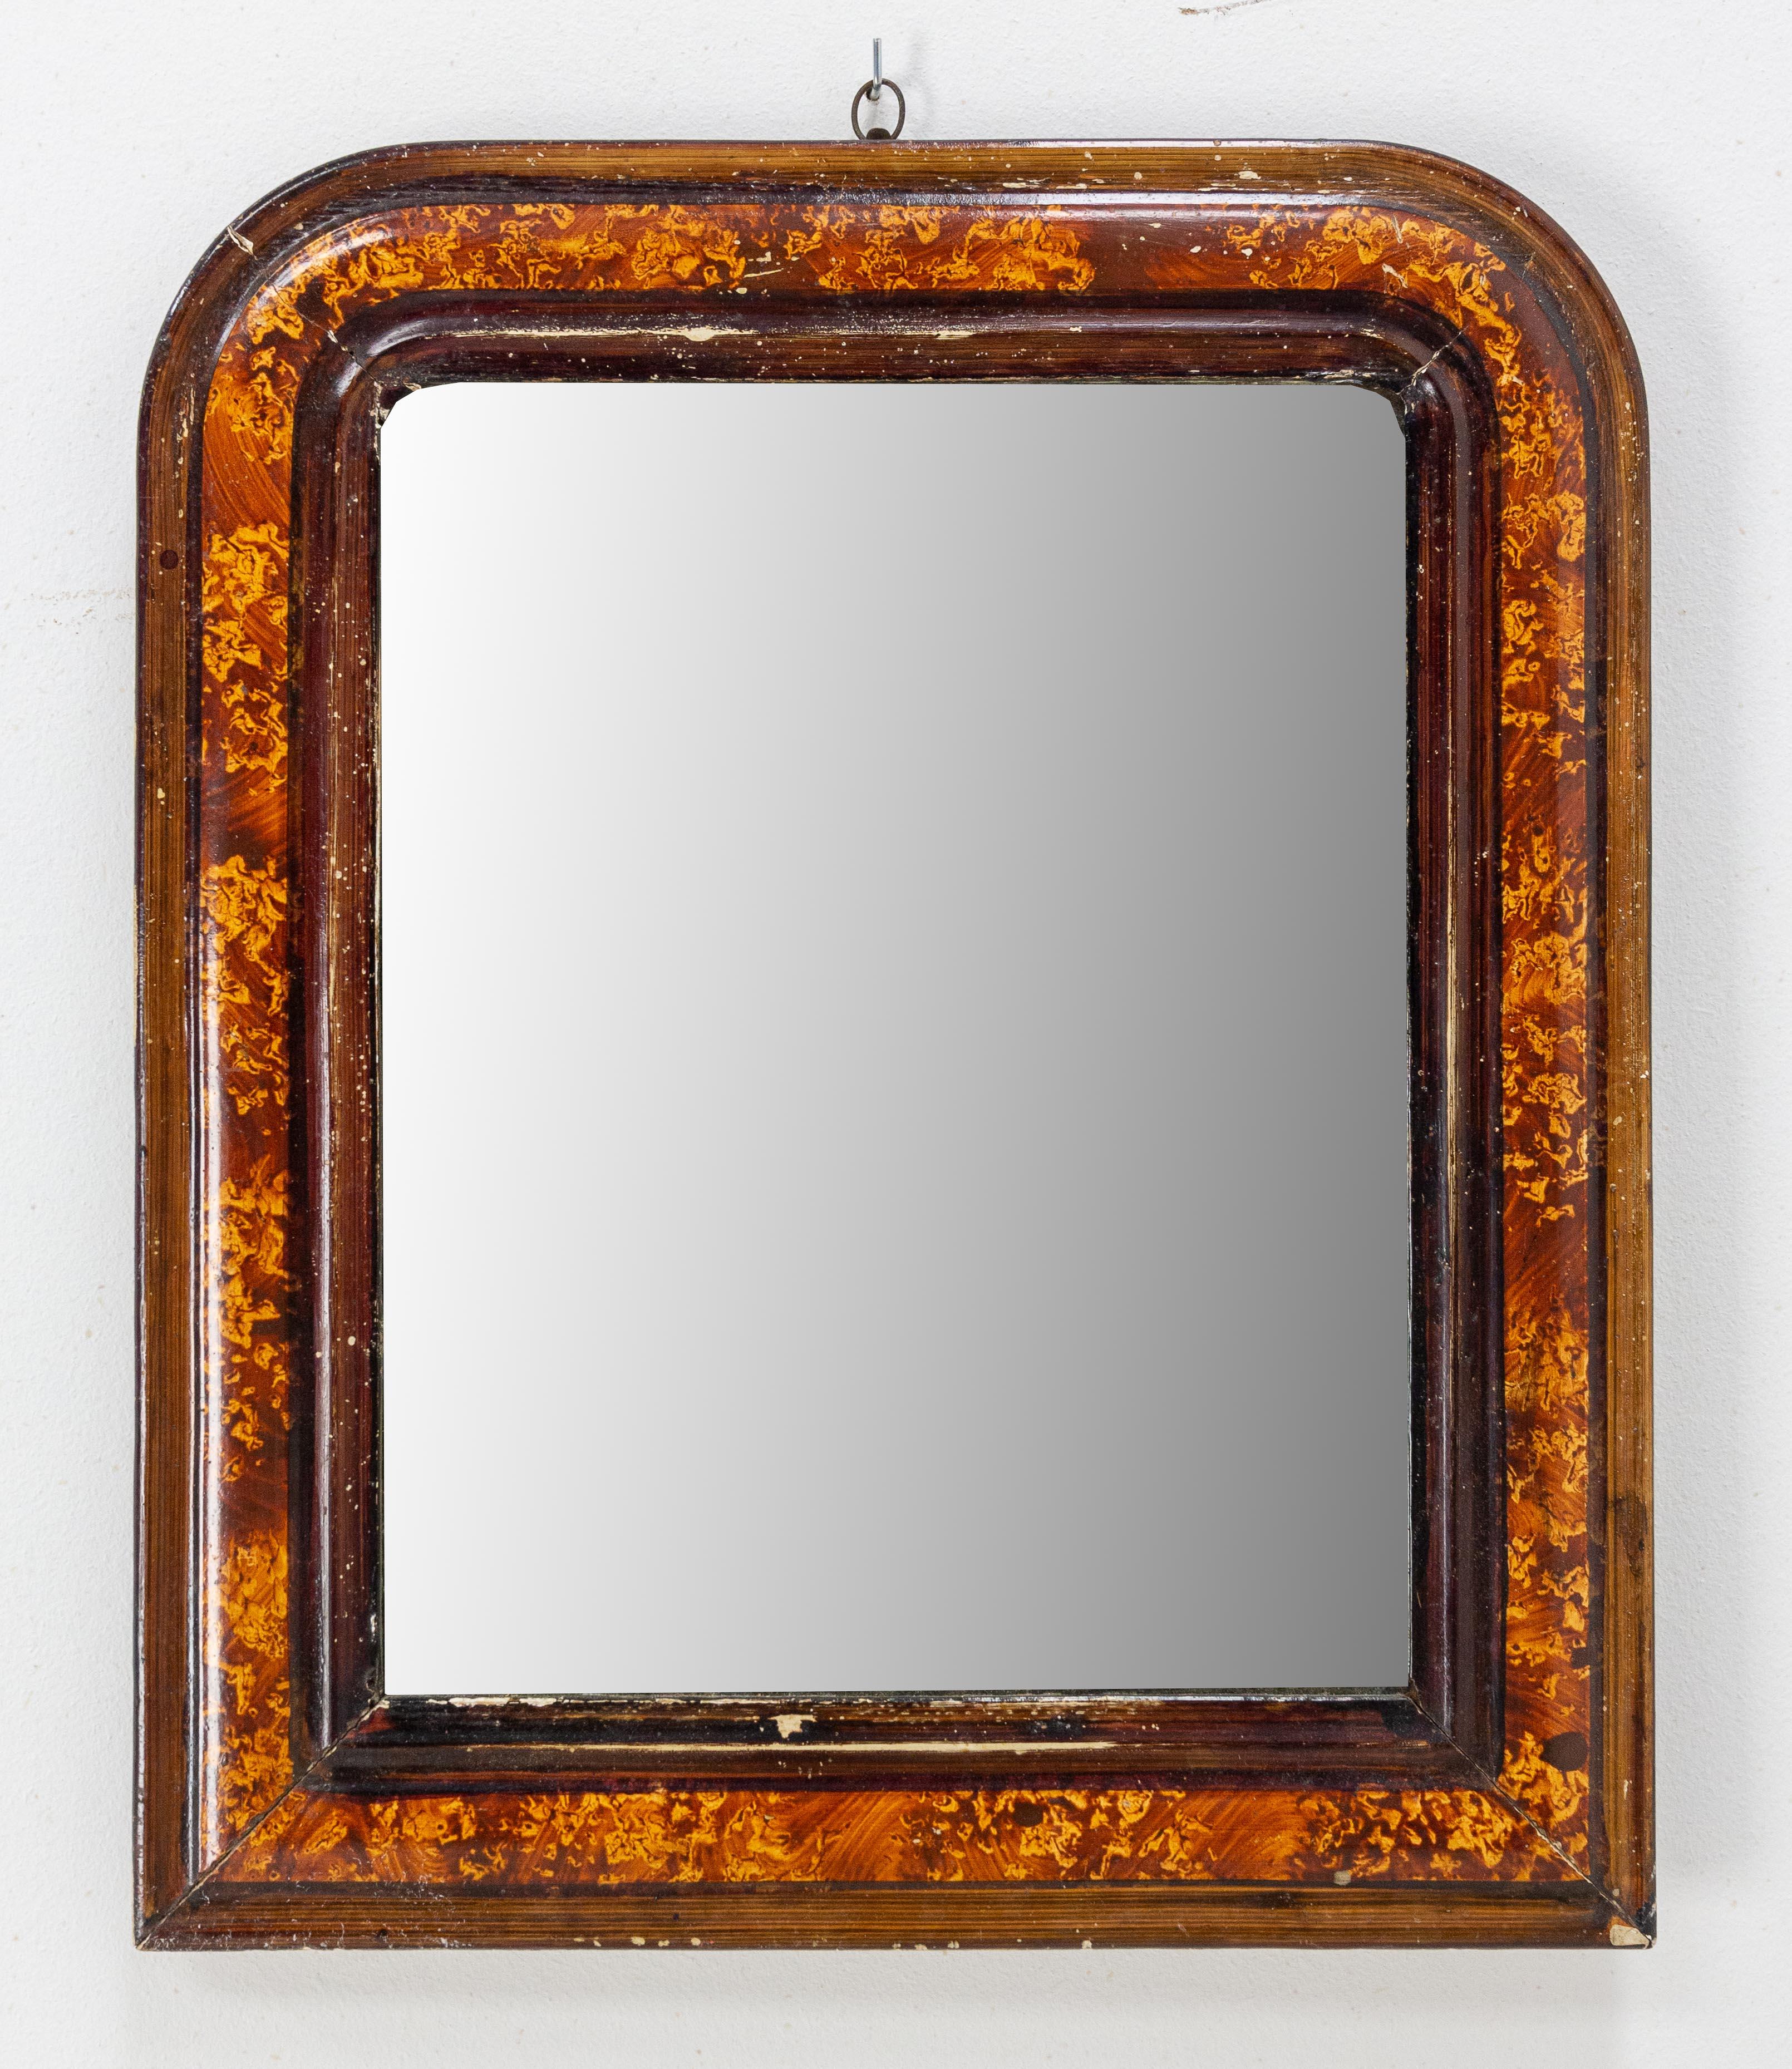 Louis Philippe Stucco mirror, 19th century French.
Original mirror.
Good antique condition.

Shipping:
L 33,5 P 2,5 H40 2Kg.